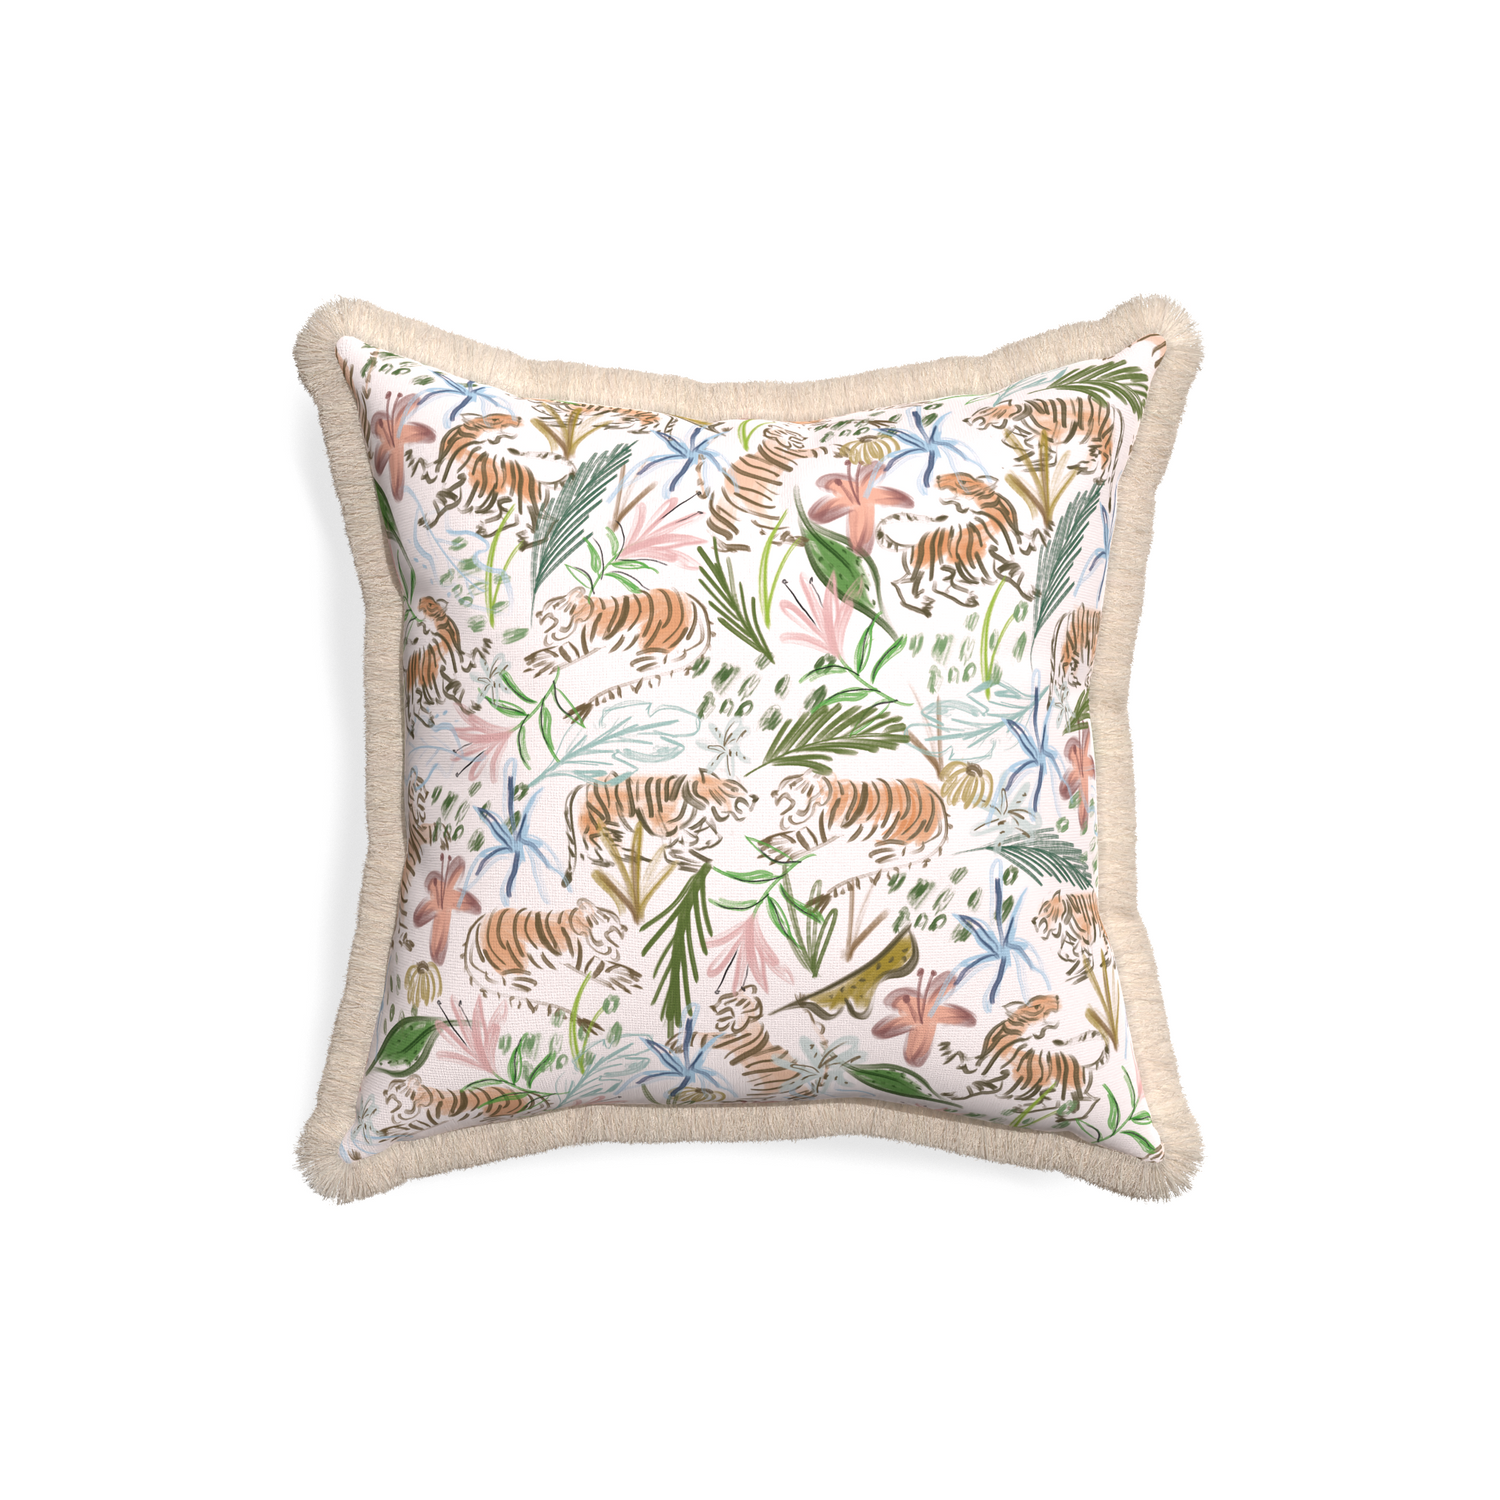 18-square frida pink custom pink chinoiserie tigerpillow with cream fringe on white background